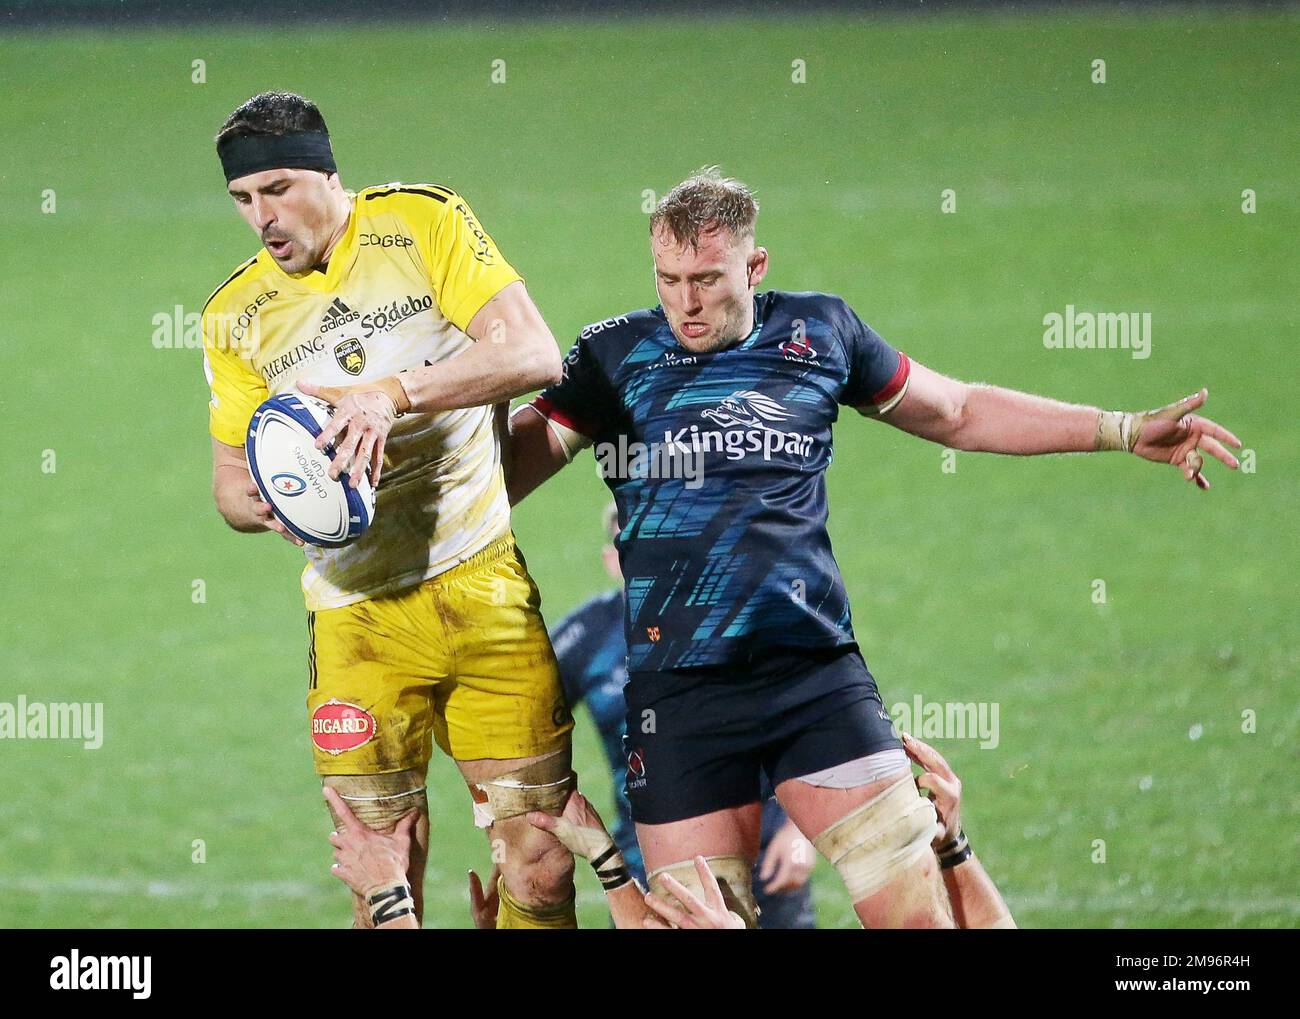 Remi Bourdeau of Stade Rochelais during the Champions Cup, rugby union match between Stade Rochelais (La Rochelle) and Ulster Rugby on January 14, 2023 at Marcel Deflandre stadium in La Rochelle, France - Photo: Laurent Lairys/DPPI/LiveMedia Stock Photo